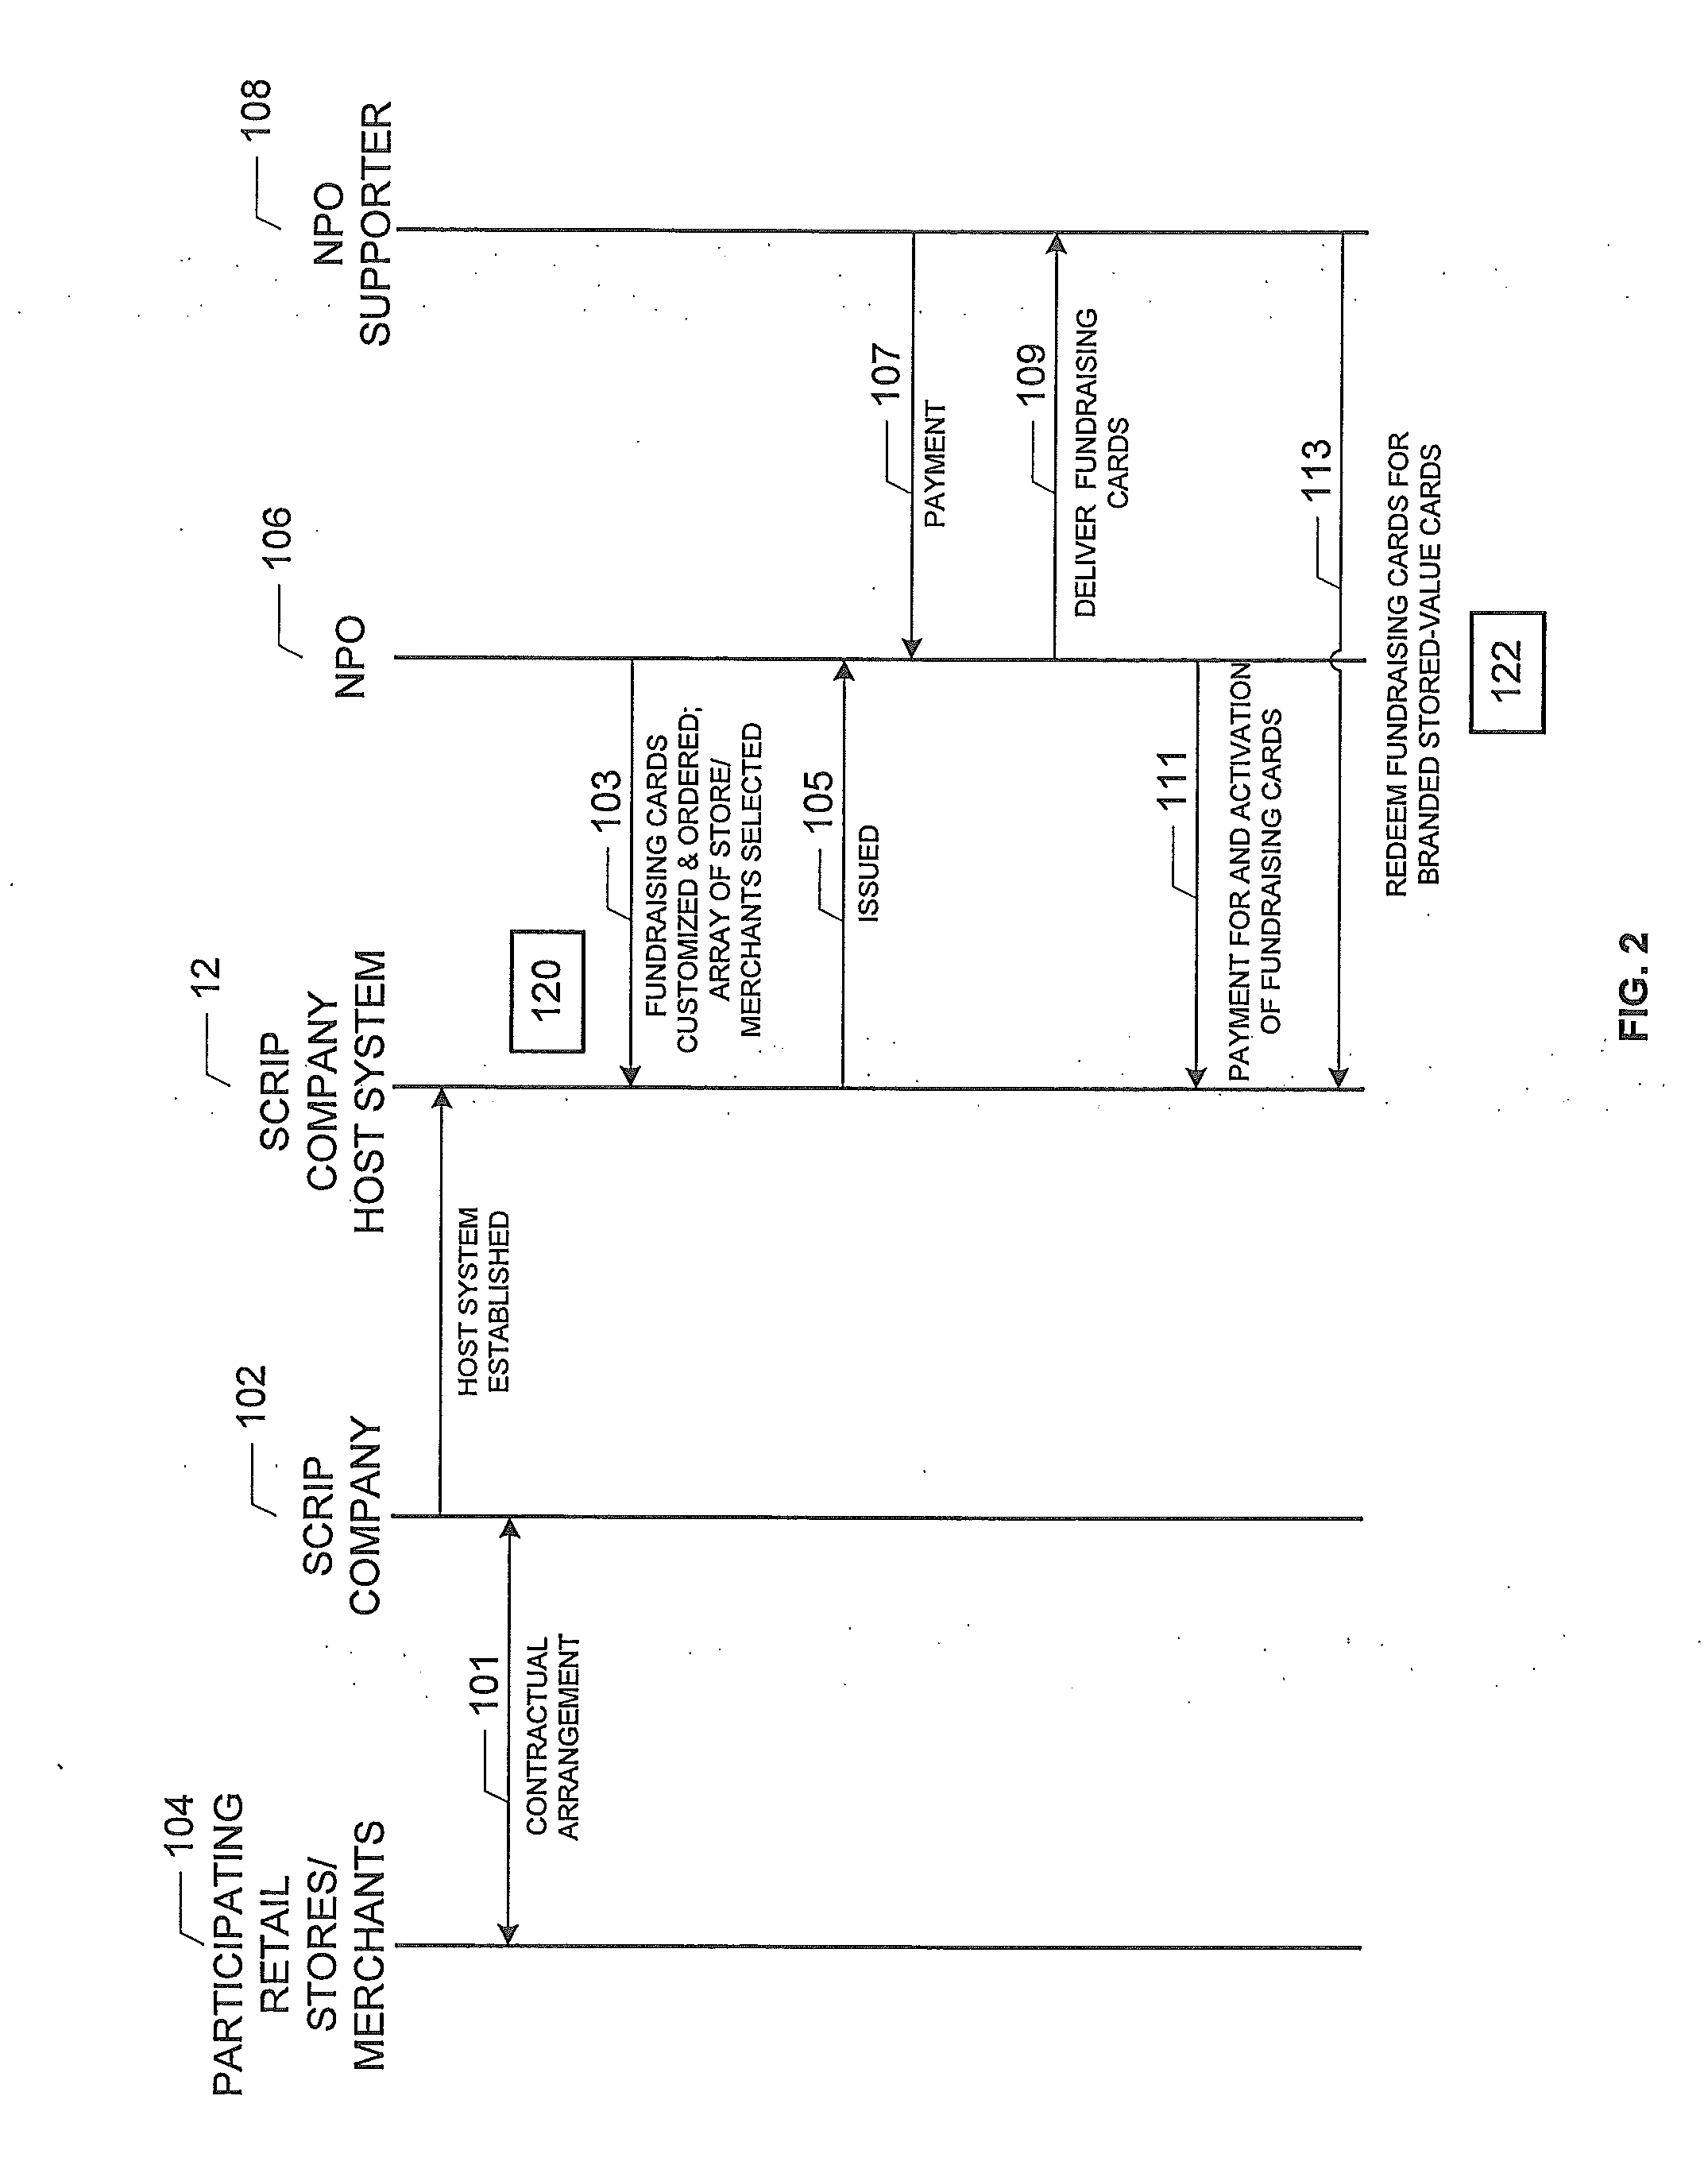 System and method for enabling a fundraising and contributions program using fundraising cards redeemable for branded stored-value cards